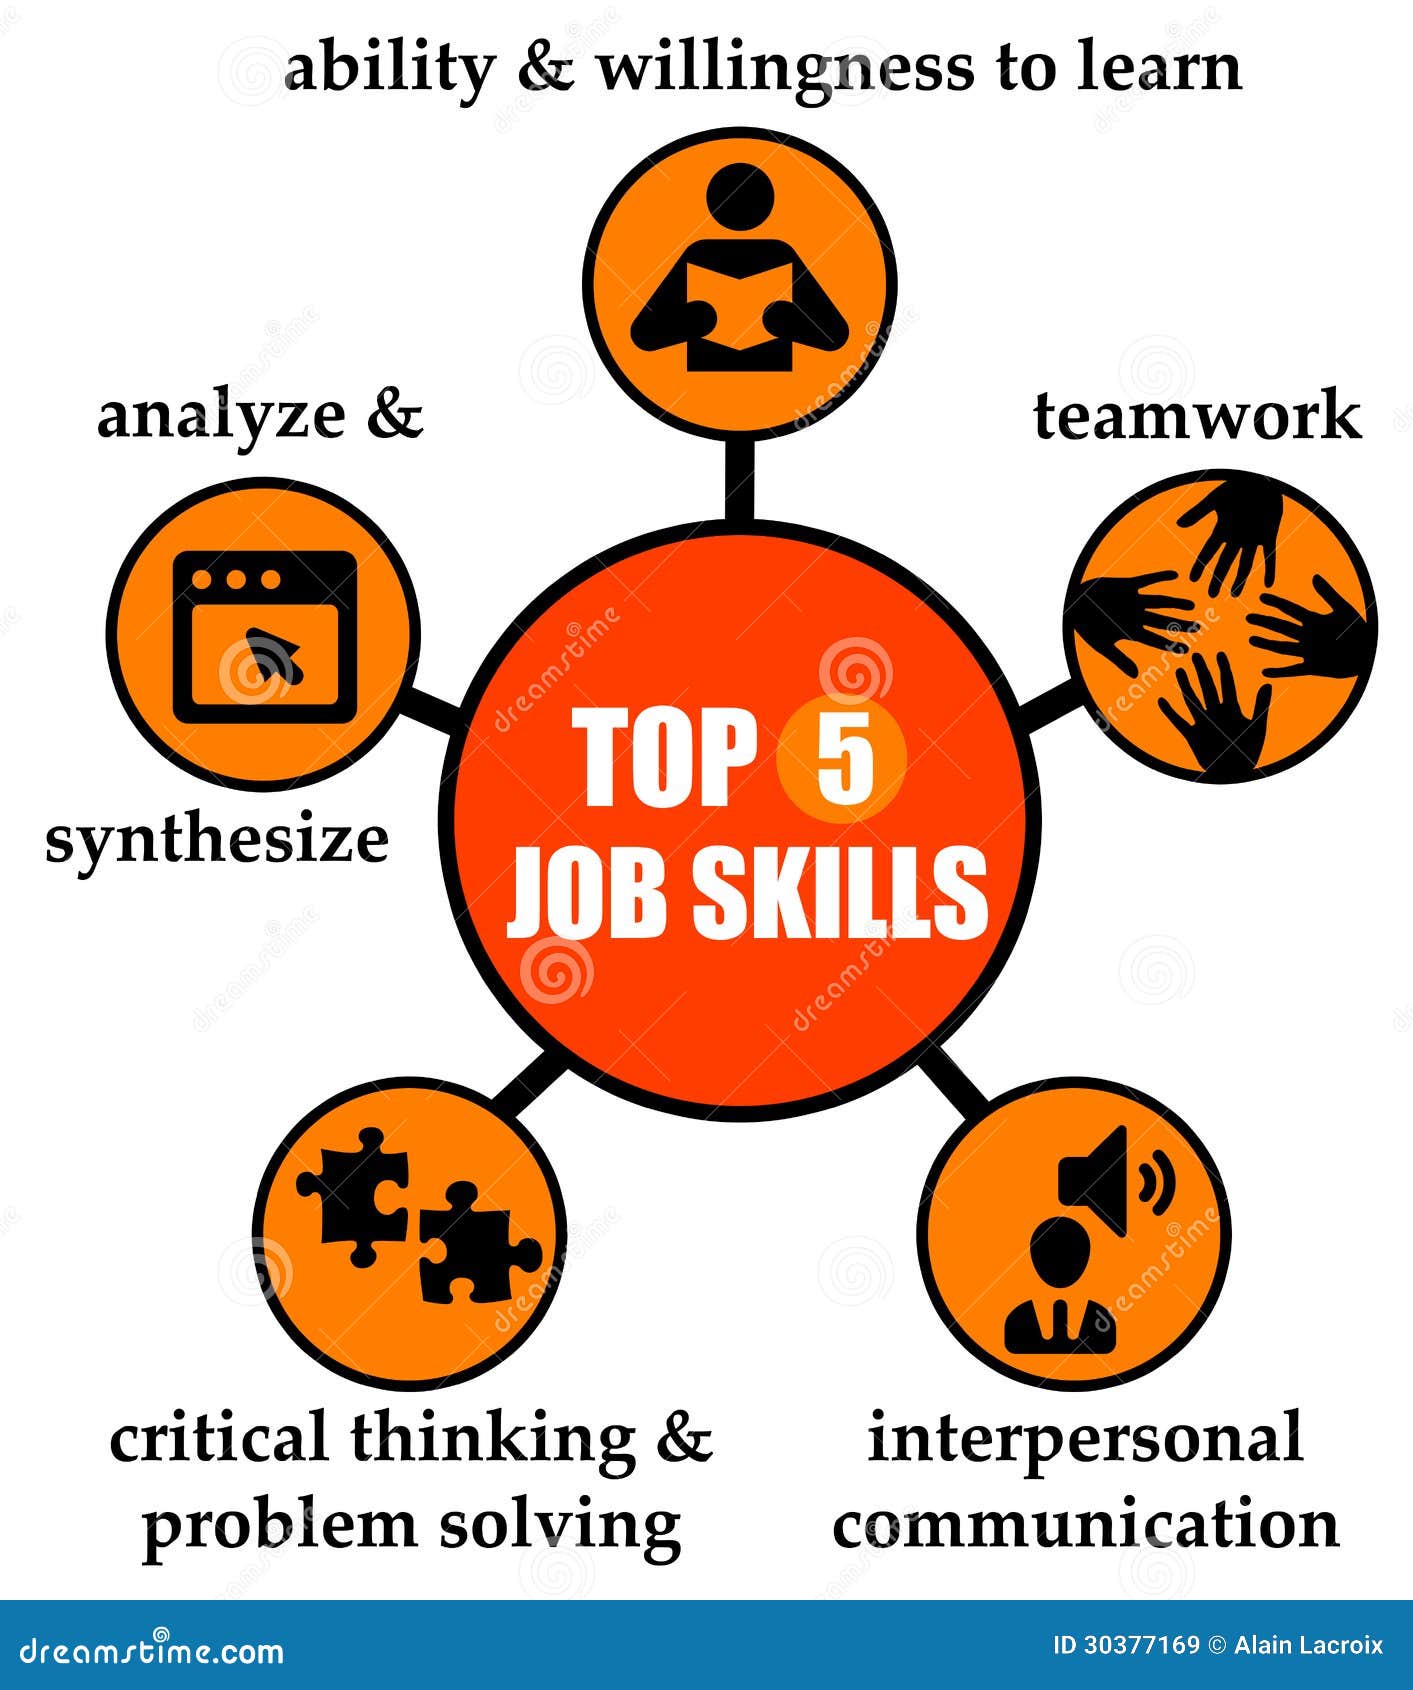 What is the meaning of skills in jobs